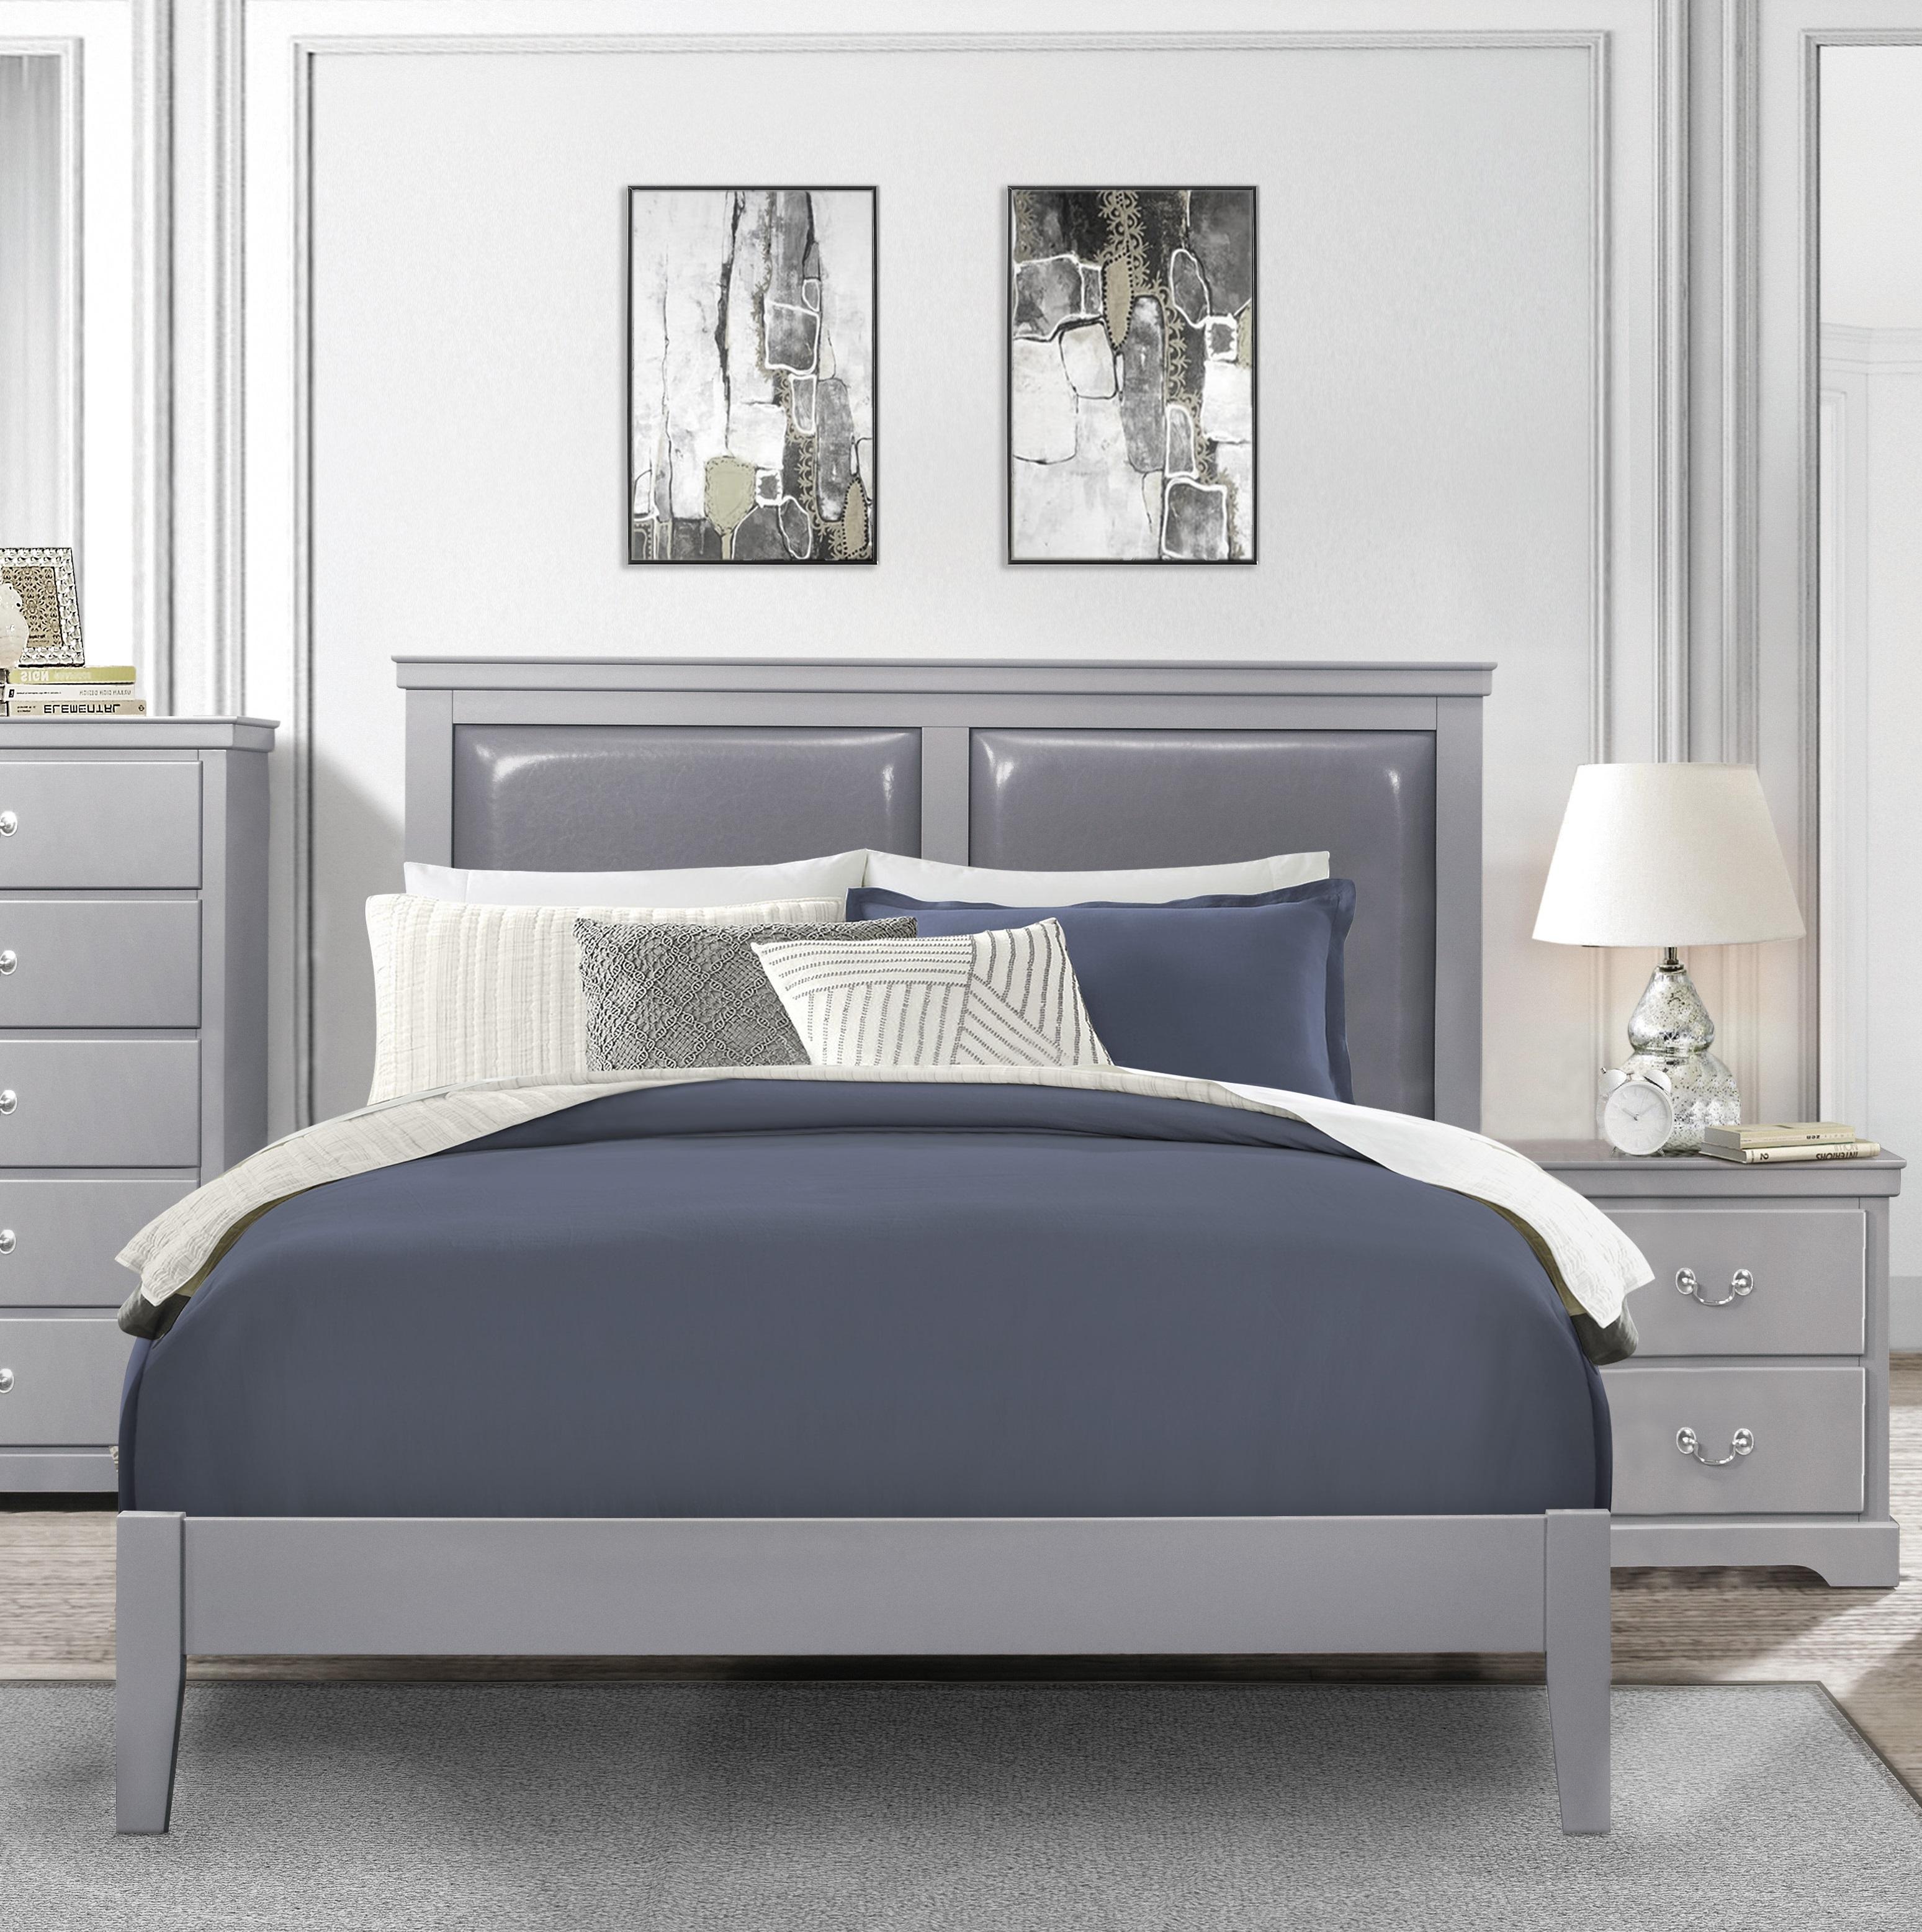 Modern Bedroom Set 1519GY-1-3PC Seabright 1519GY-1-3PC in Gray Faux Leather